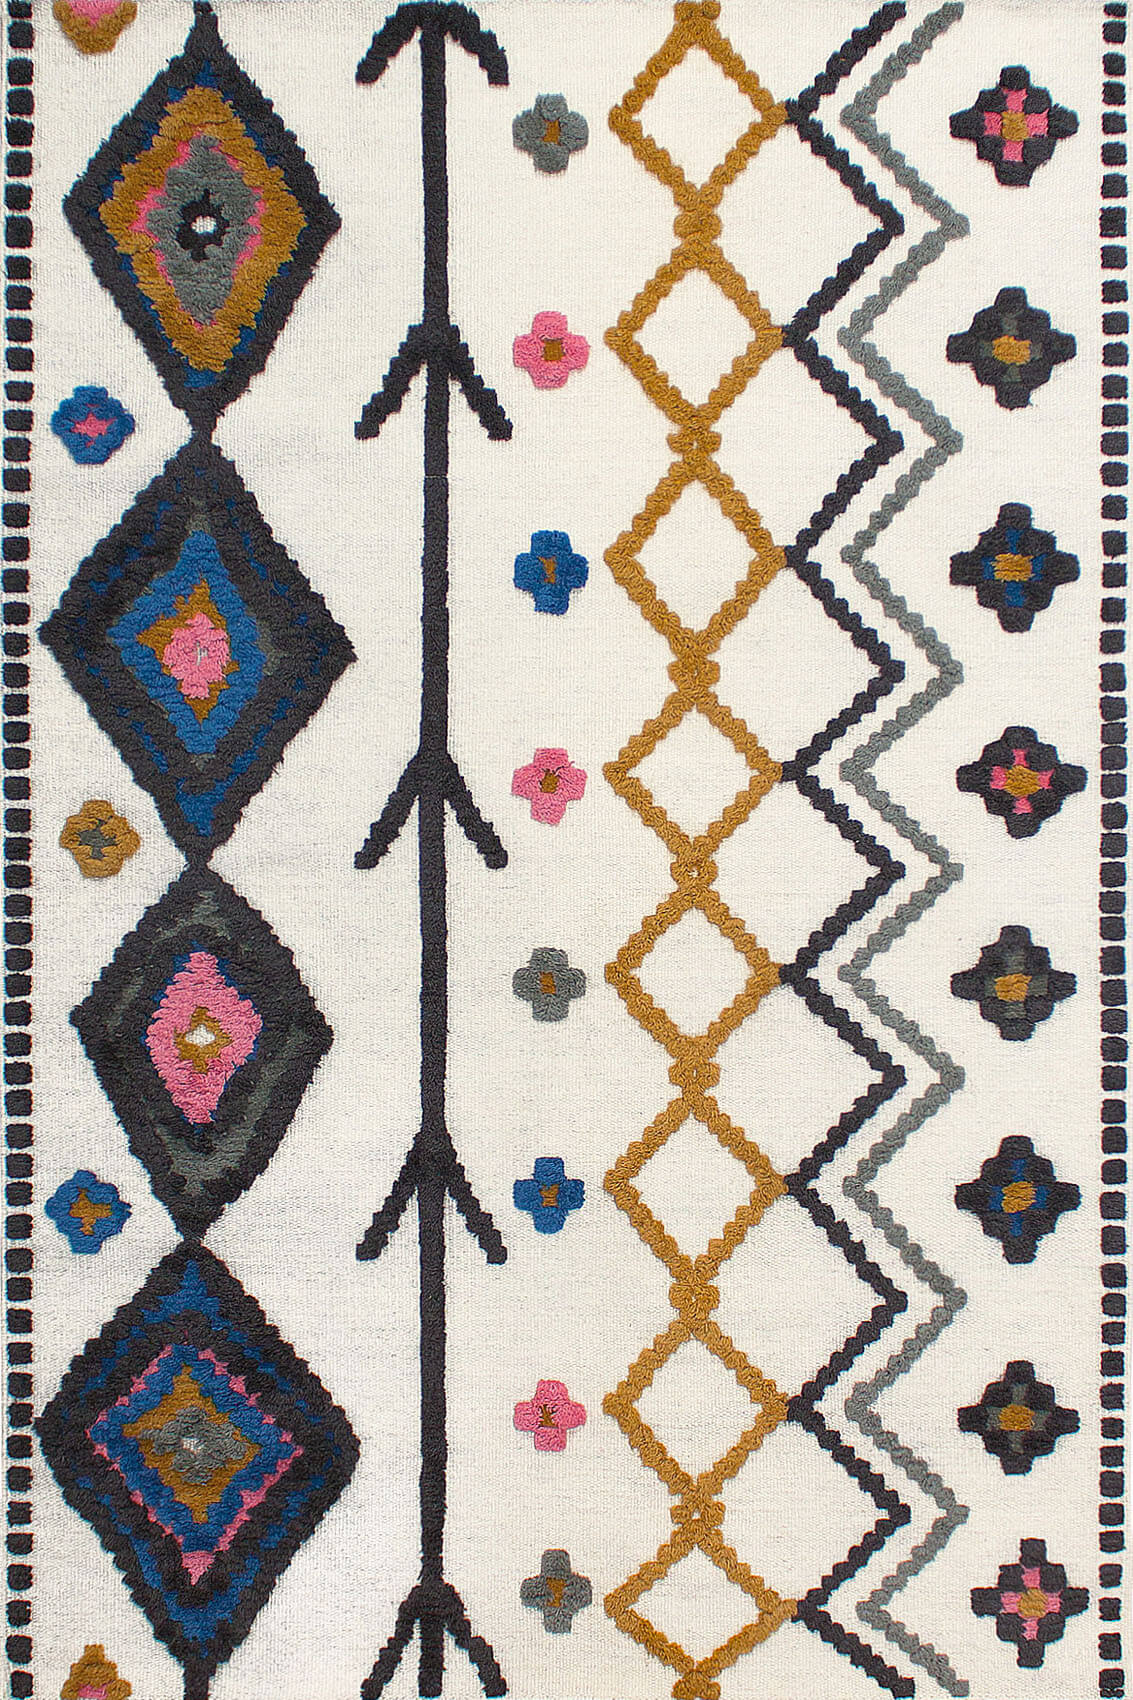 Gipsy Rug by Serge Lesage ☞ Size: 160 x 230 cm